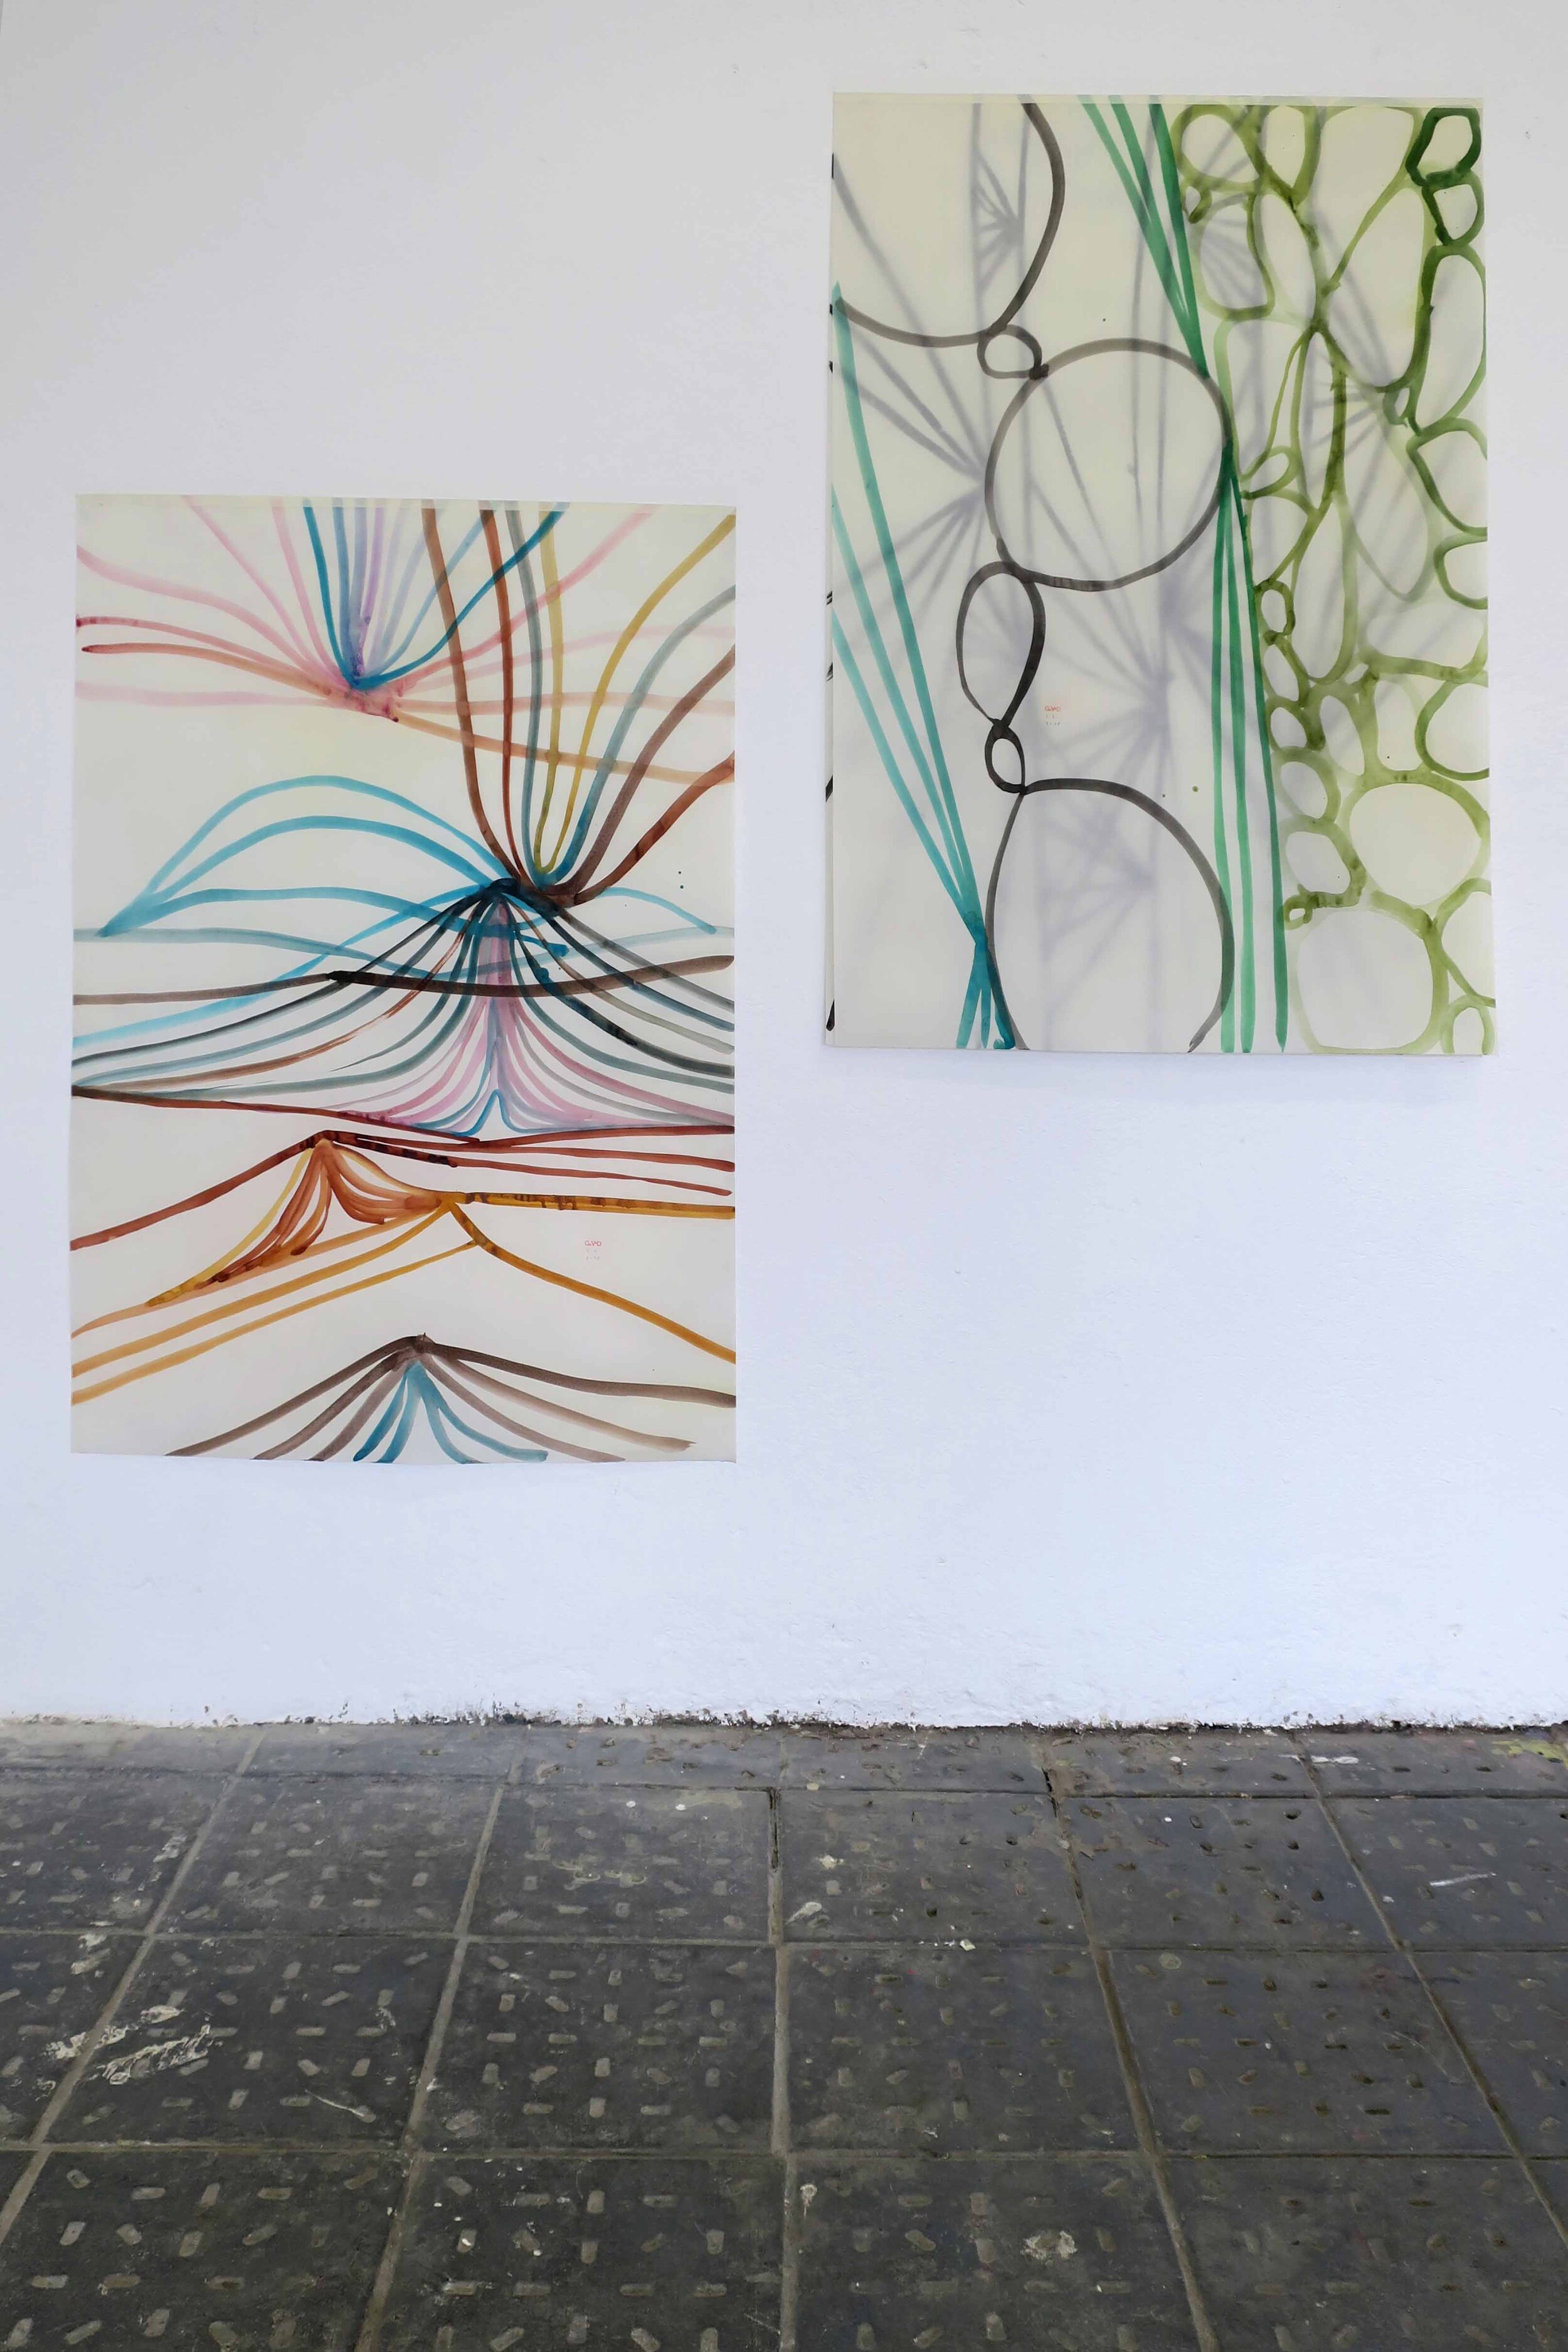  From the "Humido" Series, each 100 × 70 cm, Aquarell and Wax on Paper, 2018 